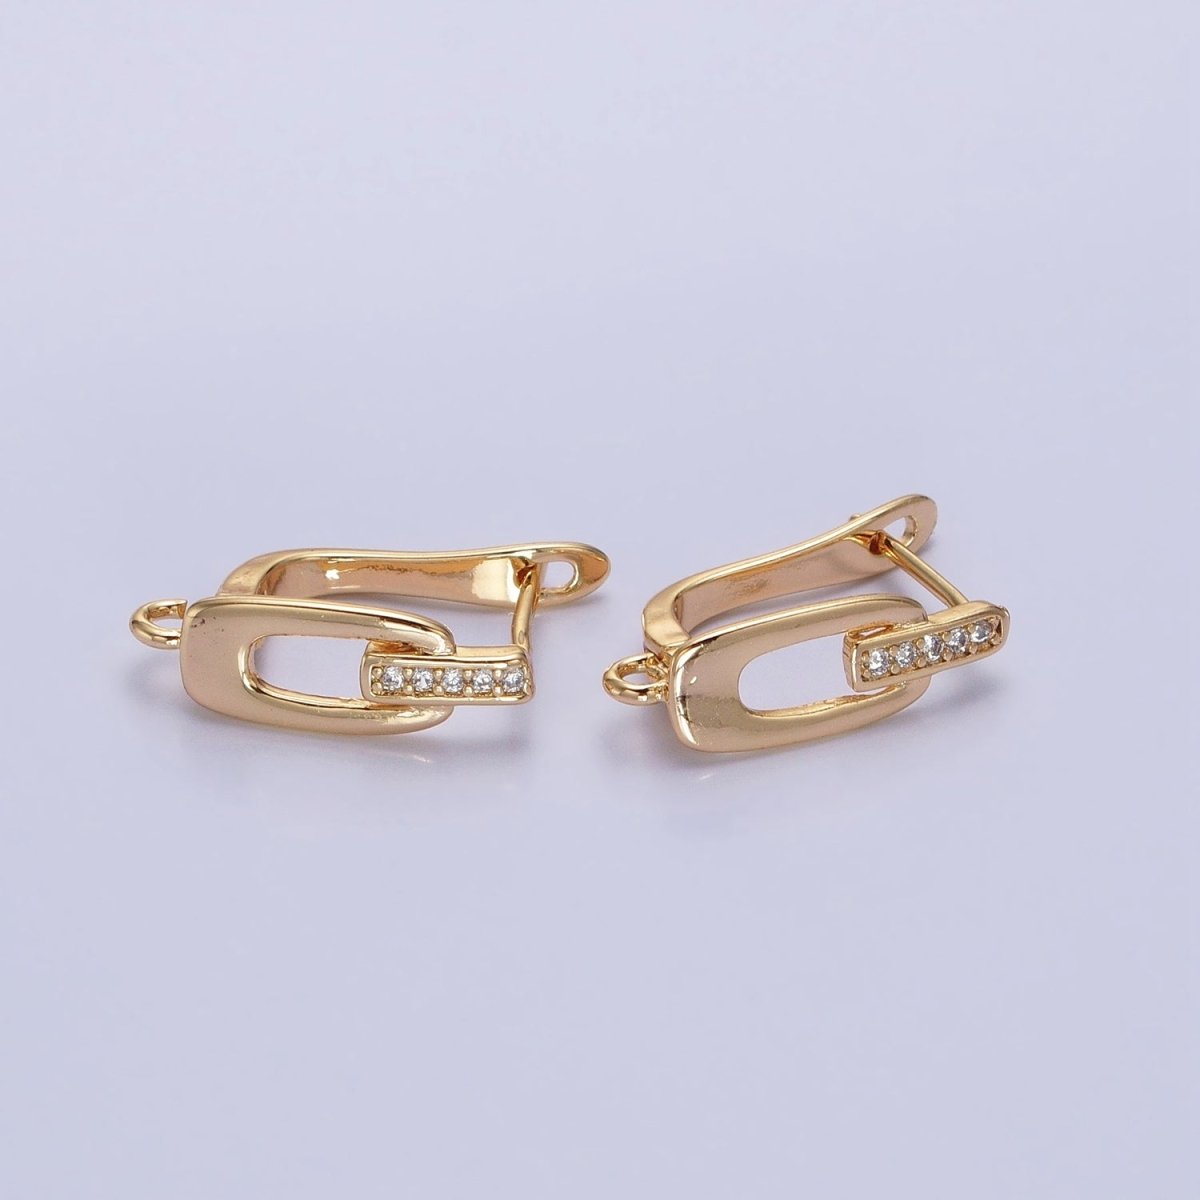 16K Gold Filled Micro Paved Bar Oblong Open Loop English Lock Earrings Supply in Gold & Silver | Z-328 Z-329 - DLUXCA